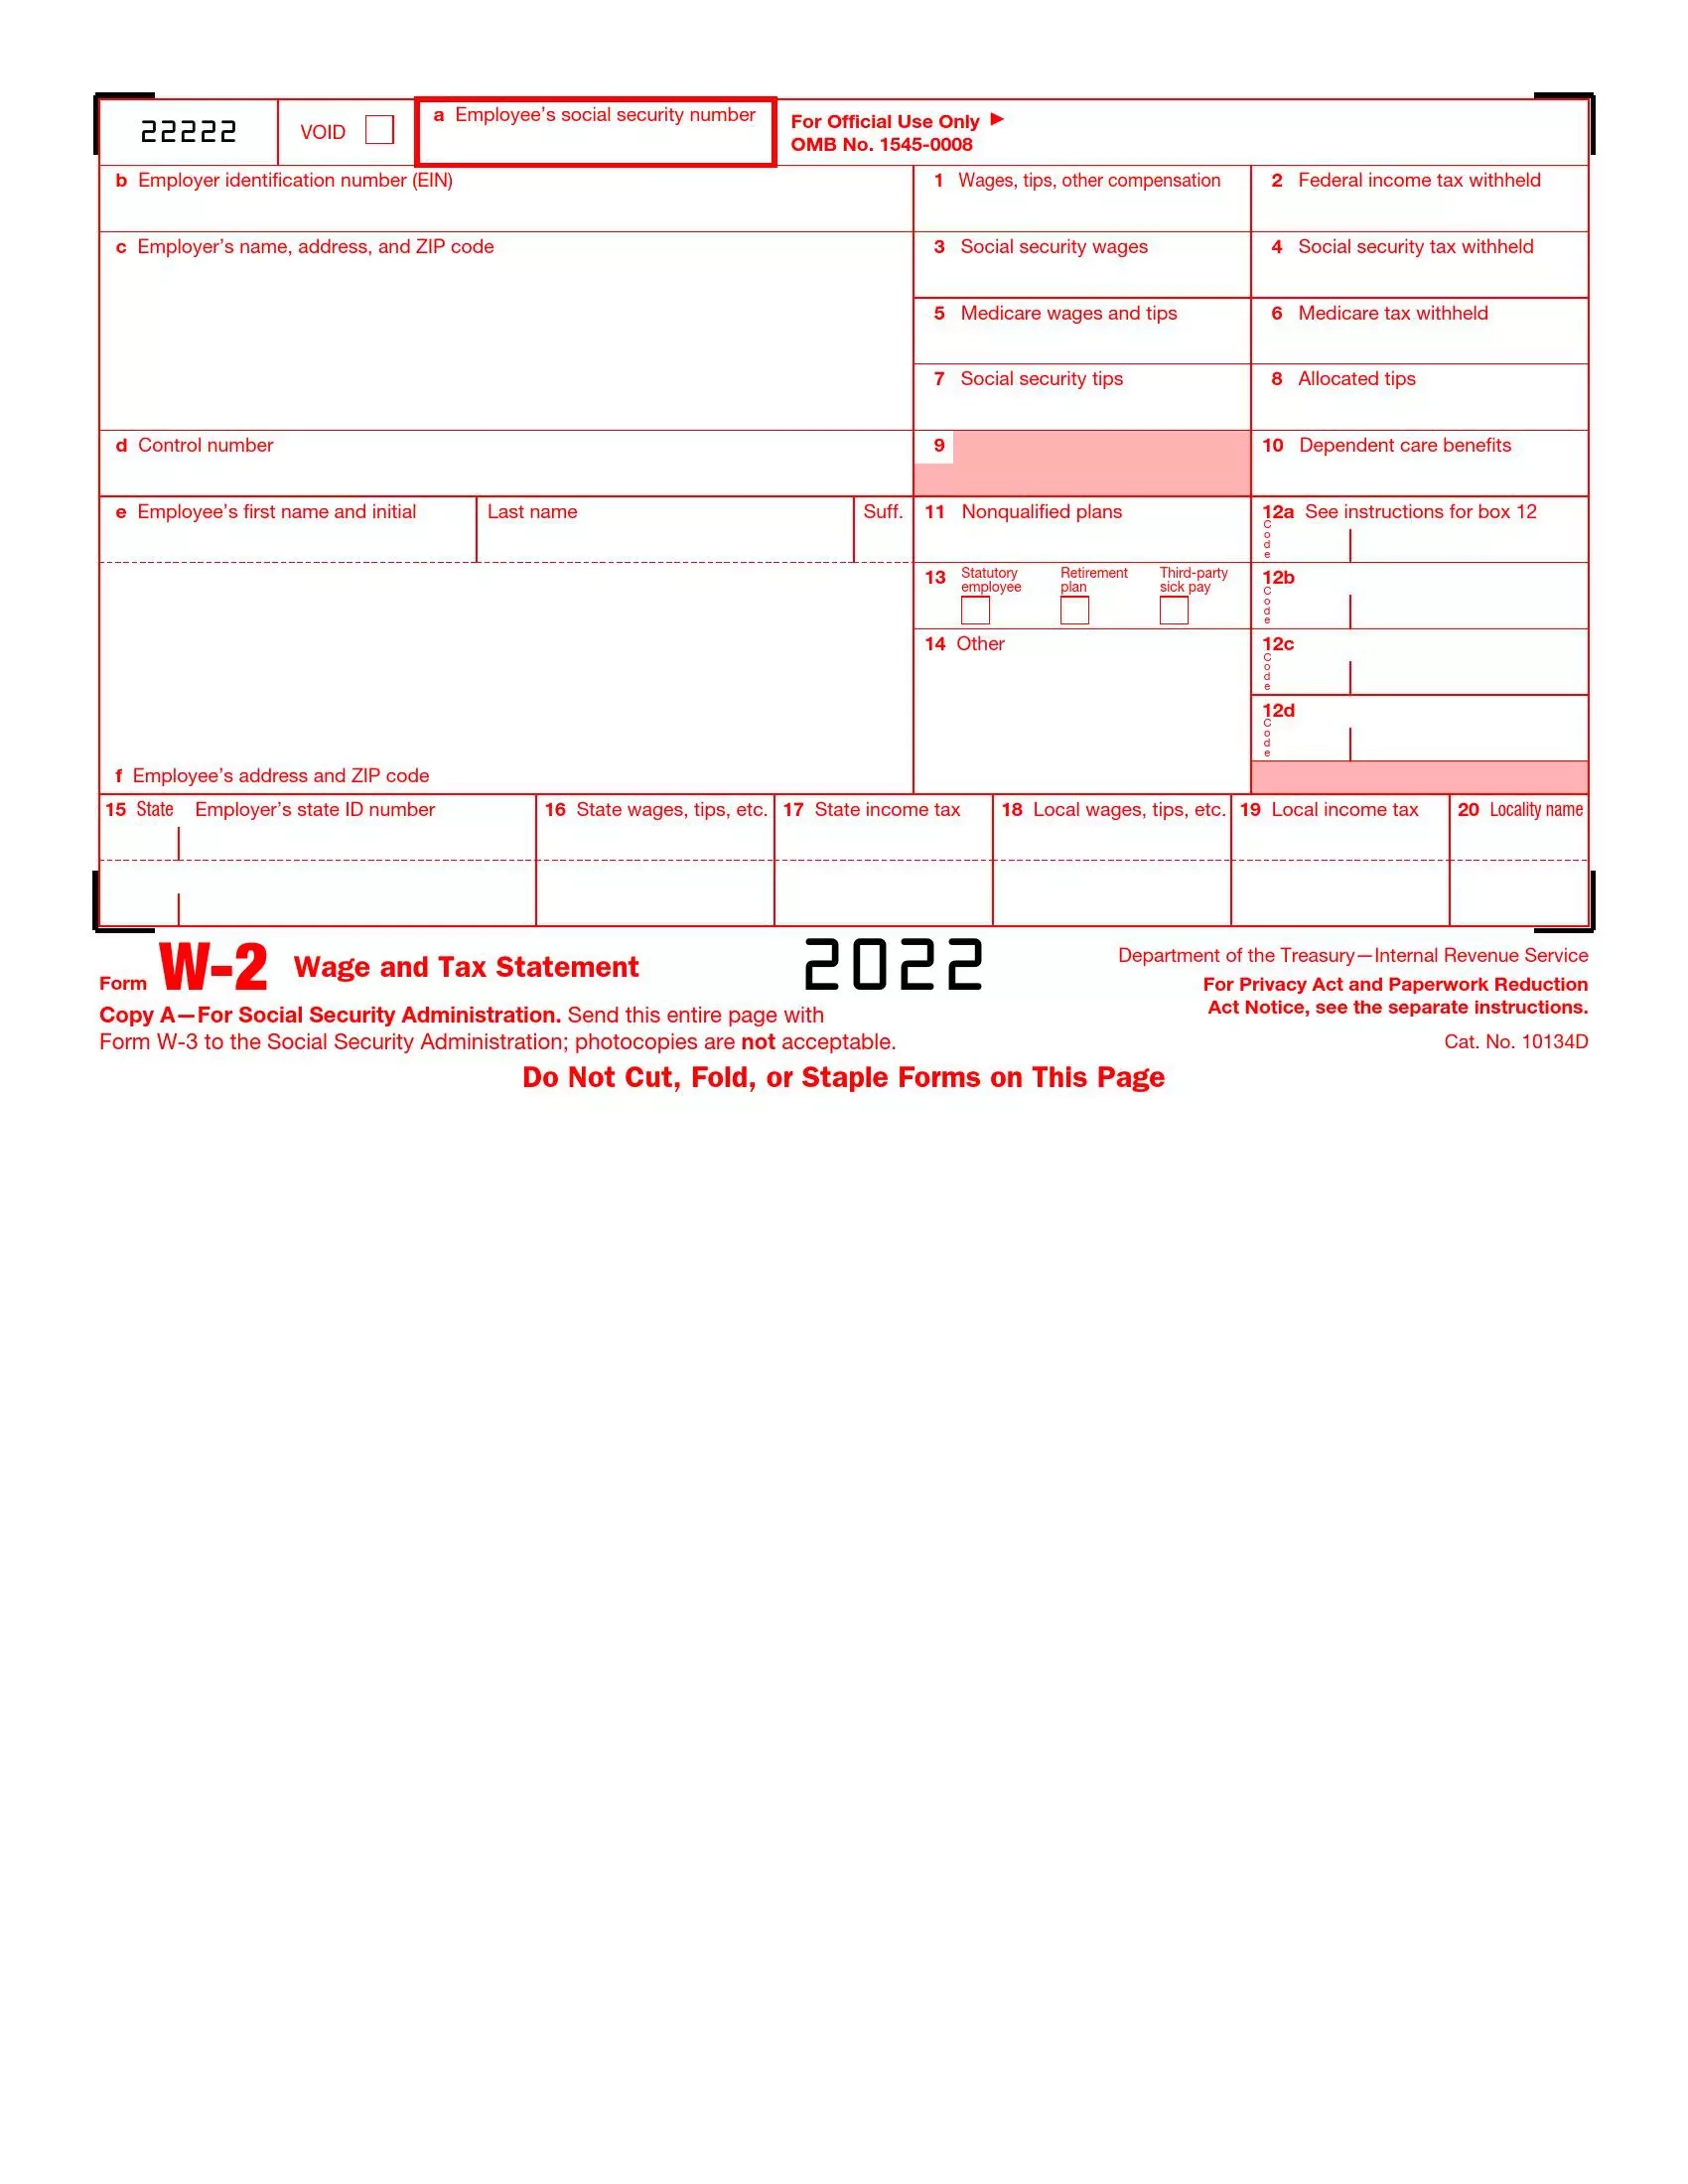 Irs Form W-2 ≡ Fill Out Printable Pdf Forms Online pertaining to Download W2 Forms